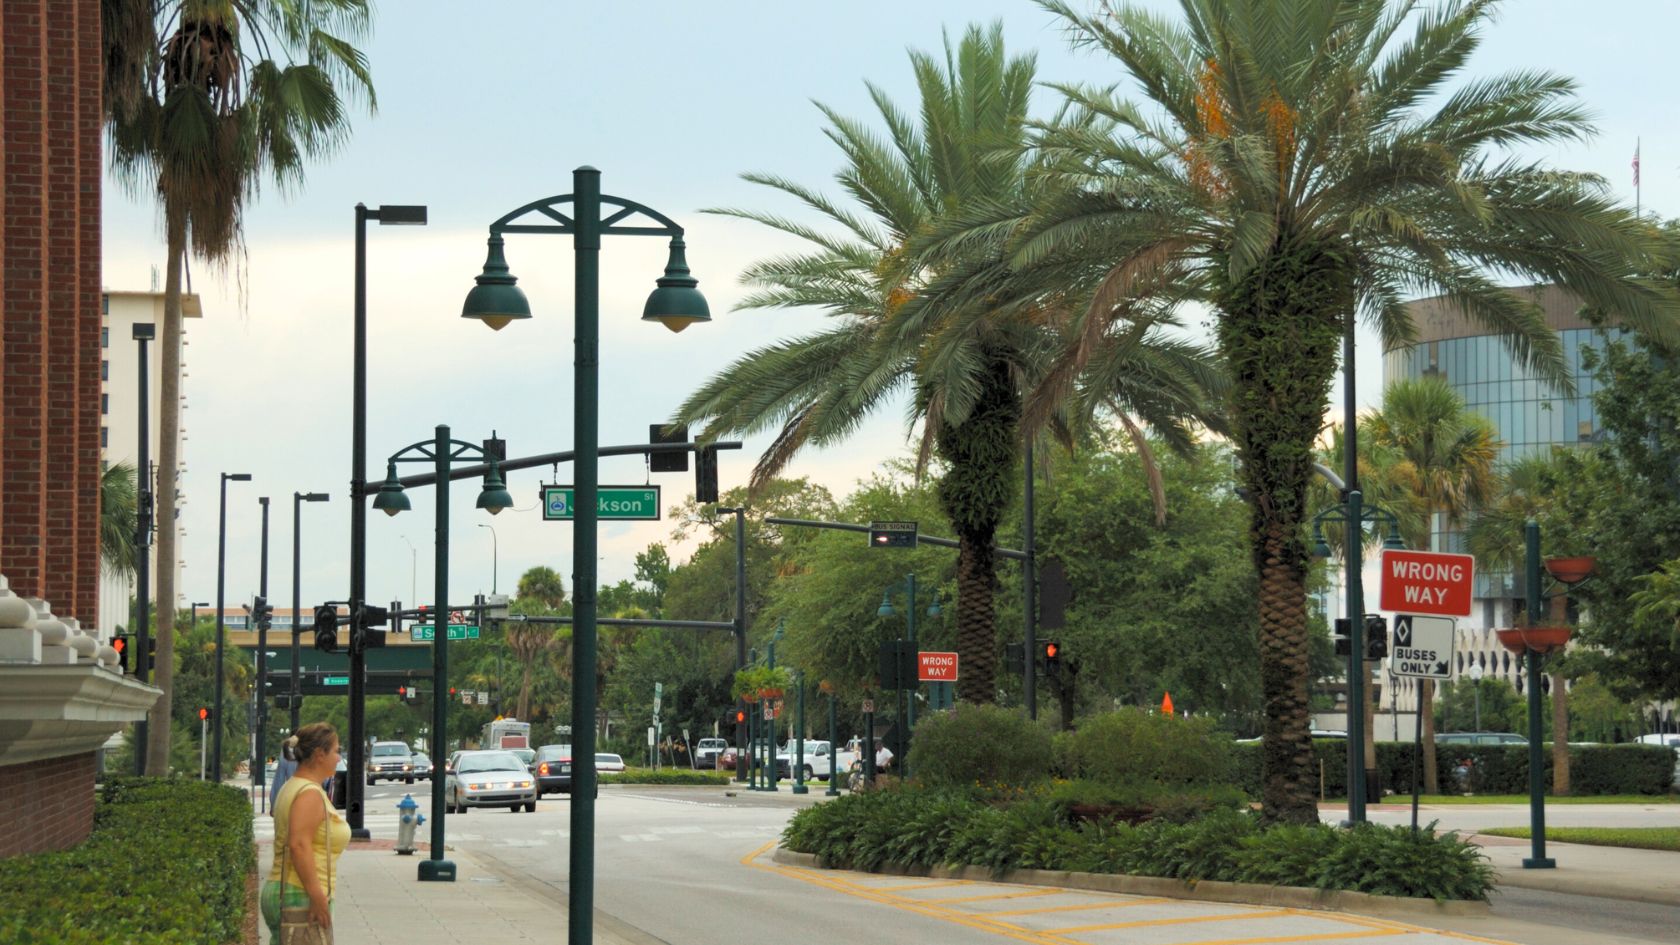 downtown orlando street lamps and palm tree view